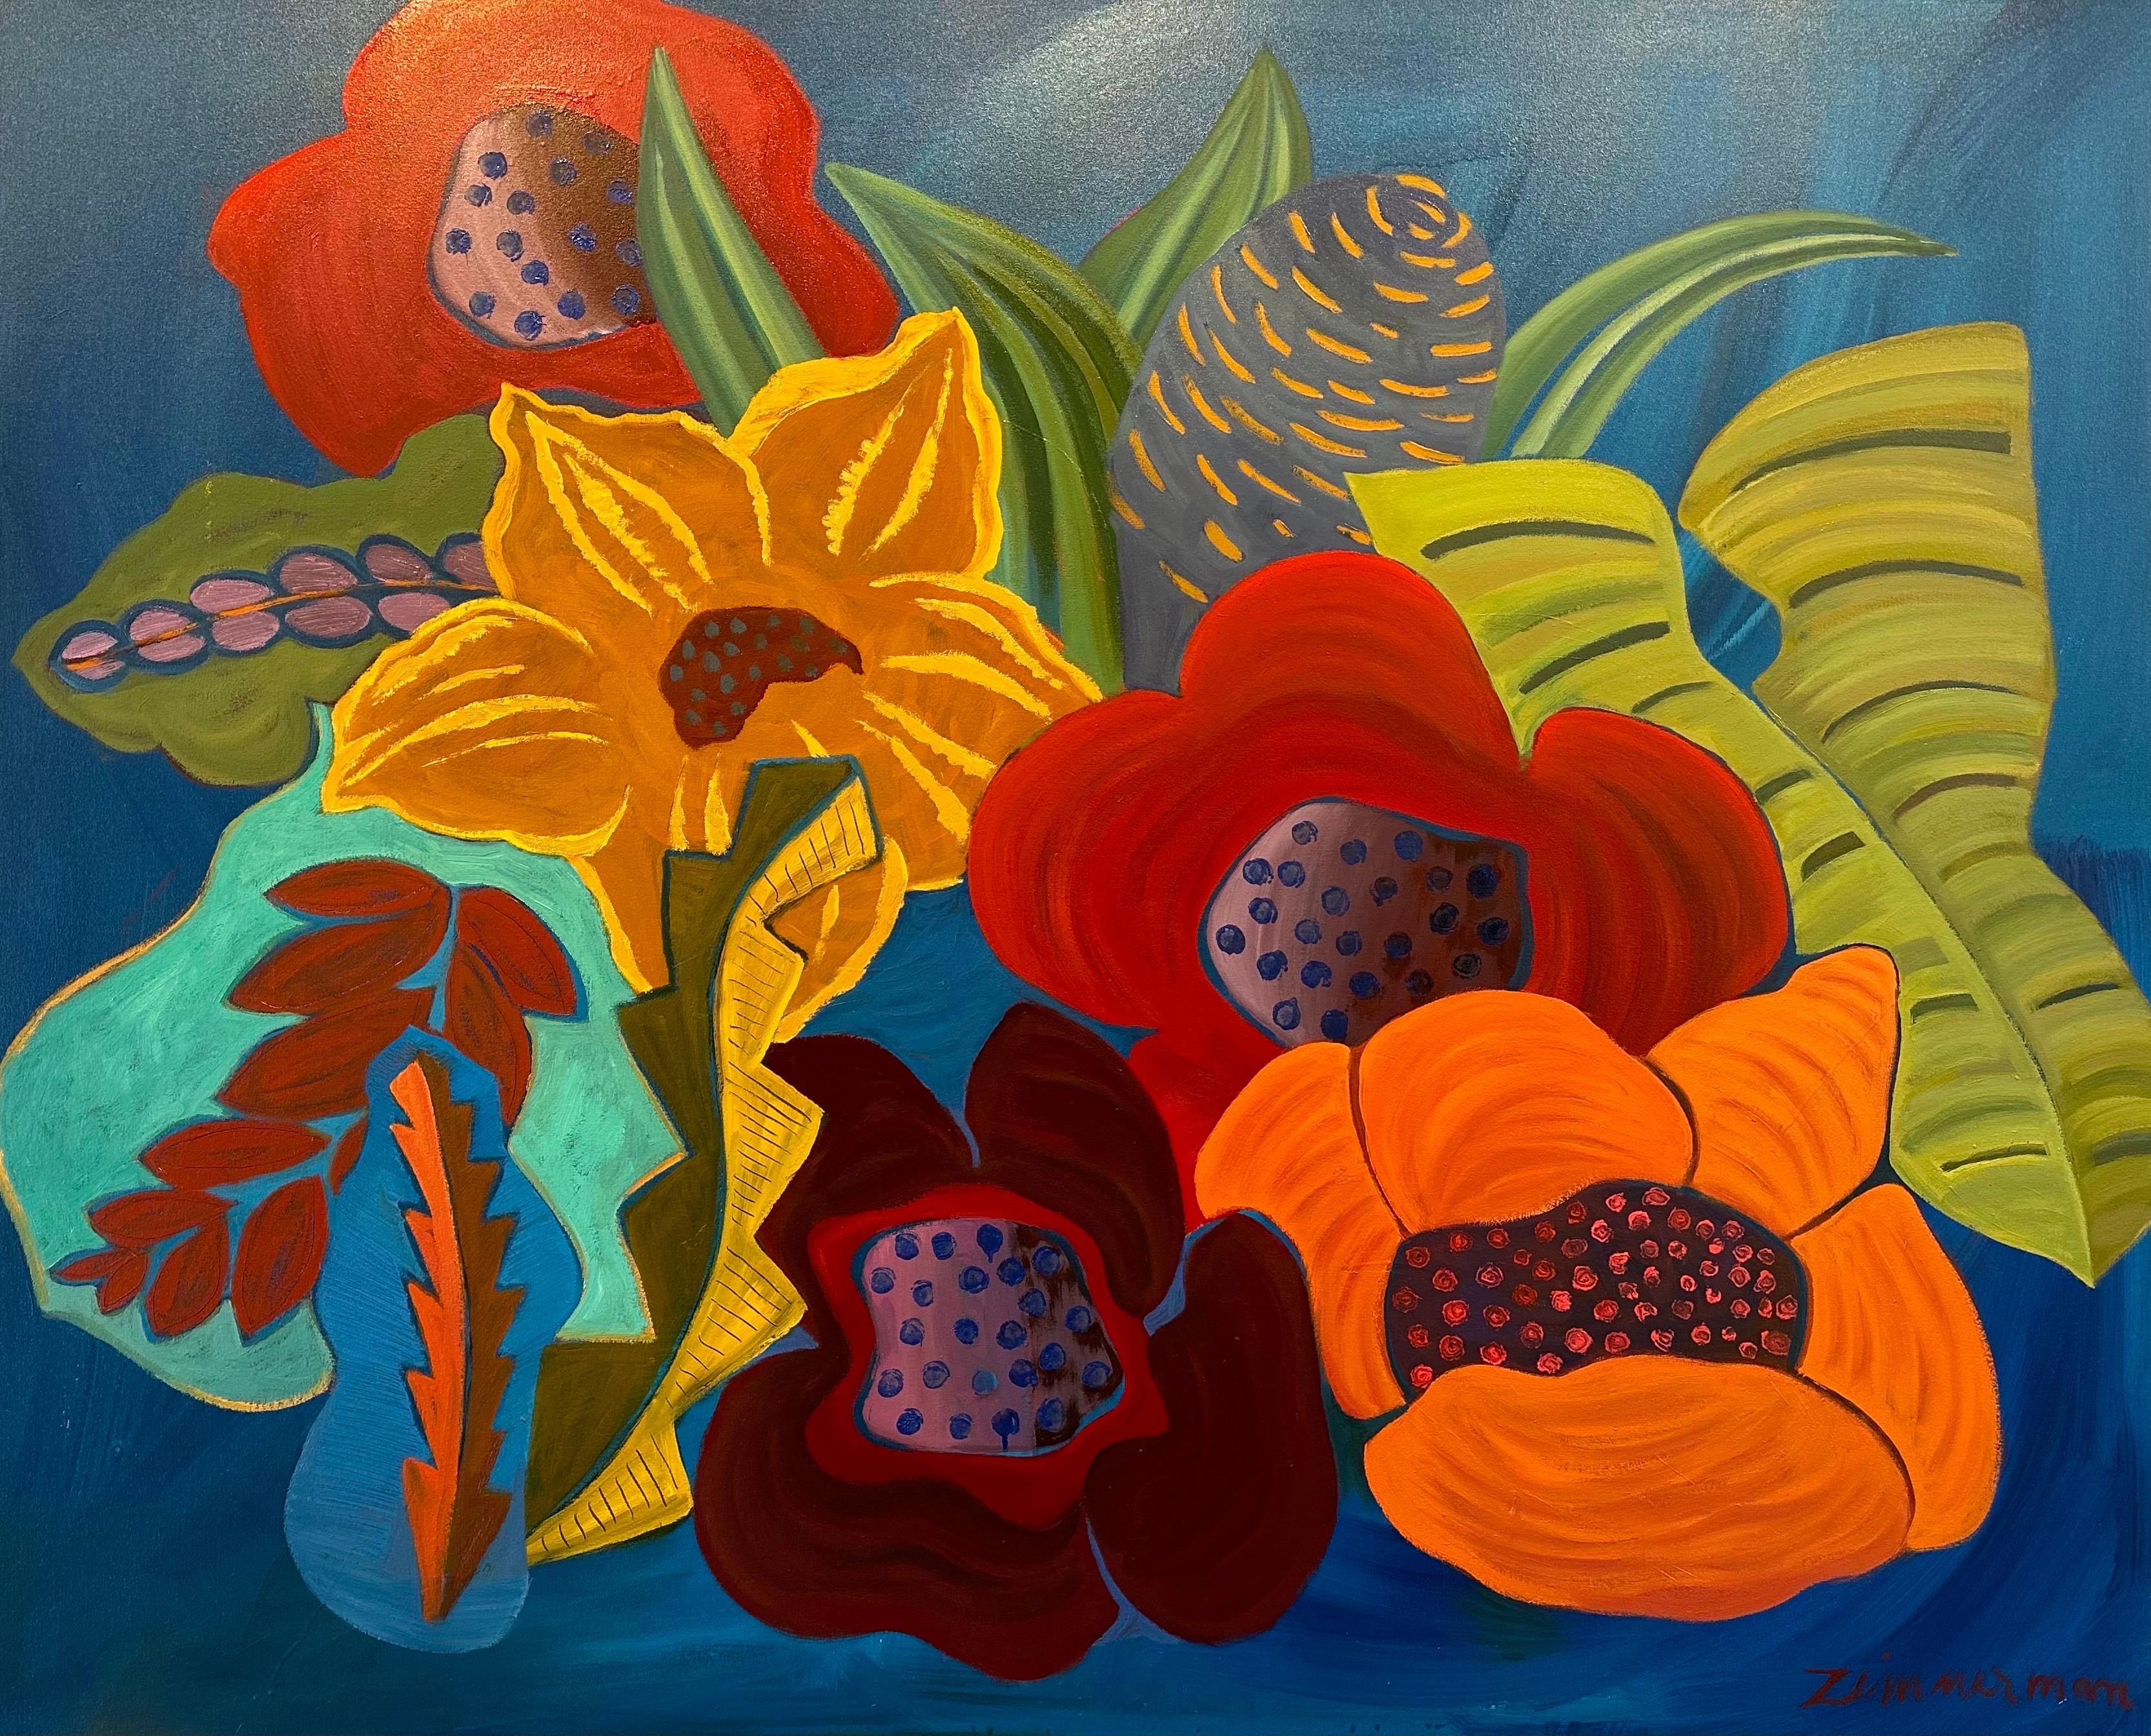 This masterpiece is exhibited in the Zimmerman Gallery, Carmel CA.

Marc Zimmerman creates playful paintings, whether deep mysterious jungle or delightfully whimsical florals. His color palette explores various harmonies yet always surprises with